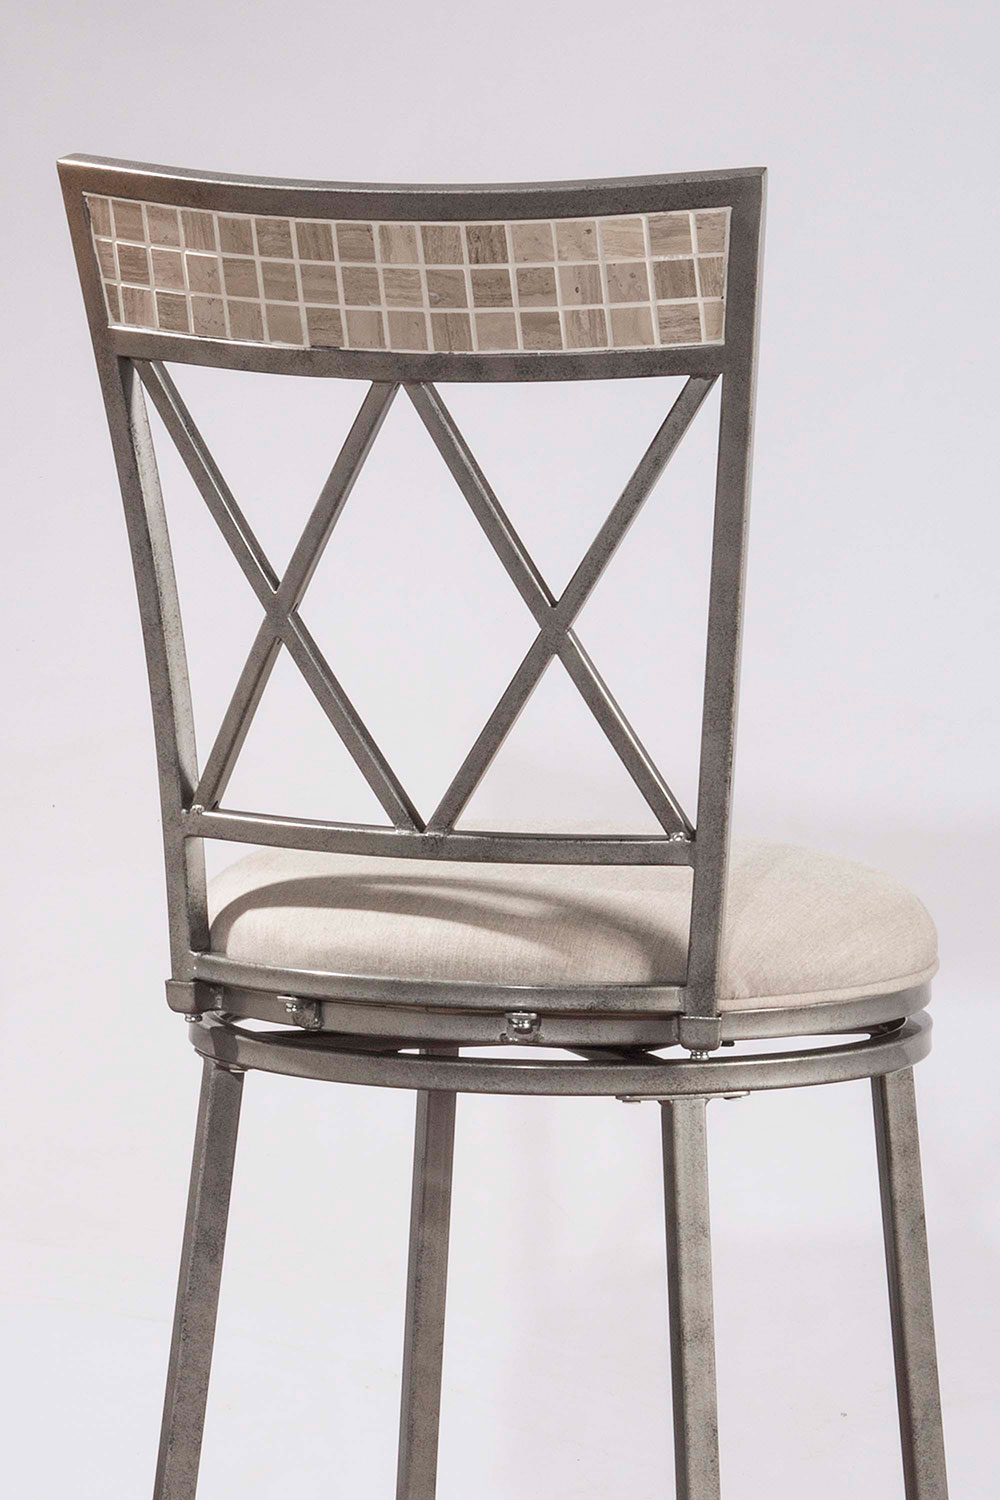 Hillsdale Milestone Indoor/Outdoor Swivel Counter Stool - Aged Pewter